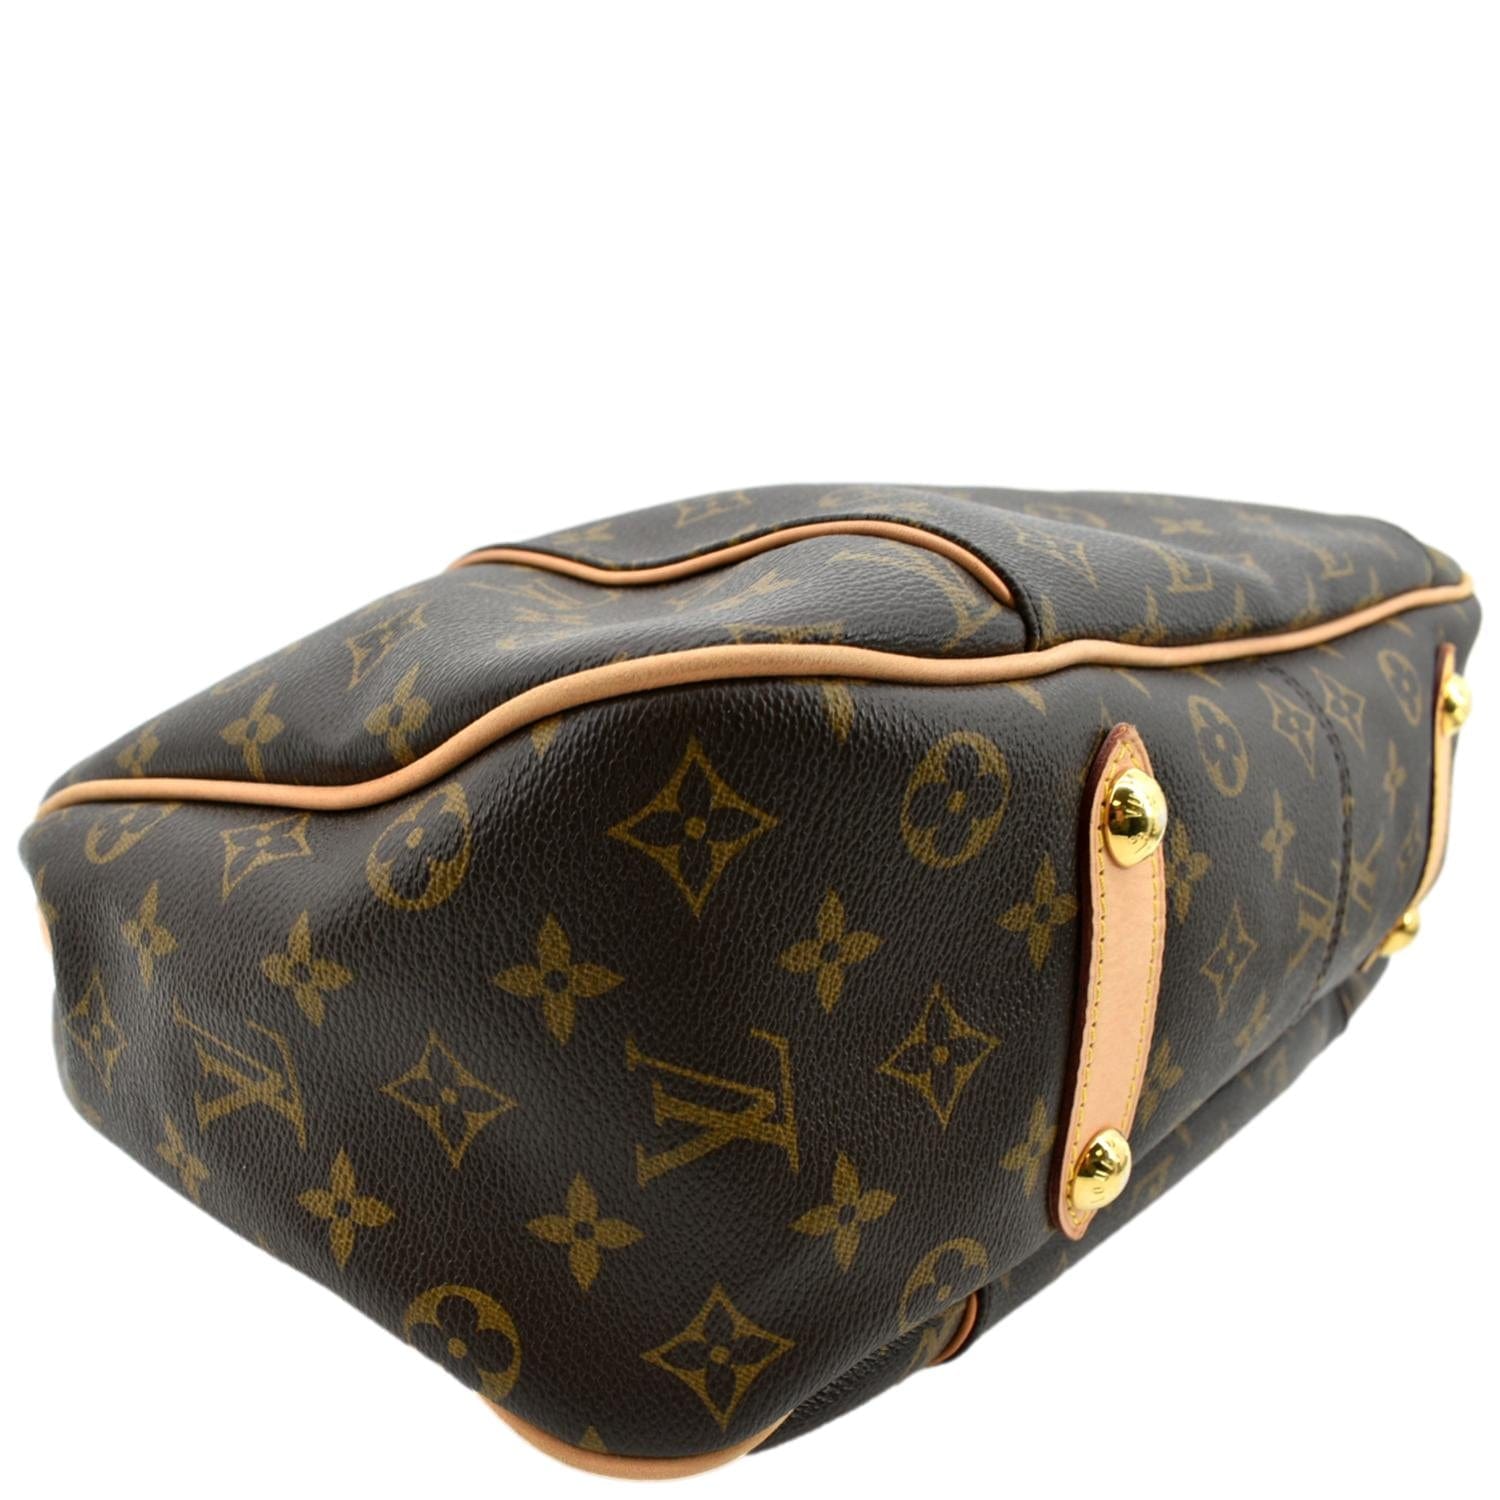 My favorite Slouchy Hobo Style Louis Vuitton Galliera GM In